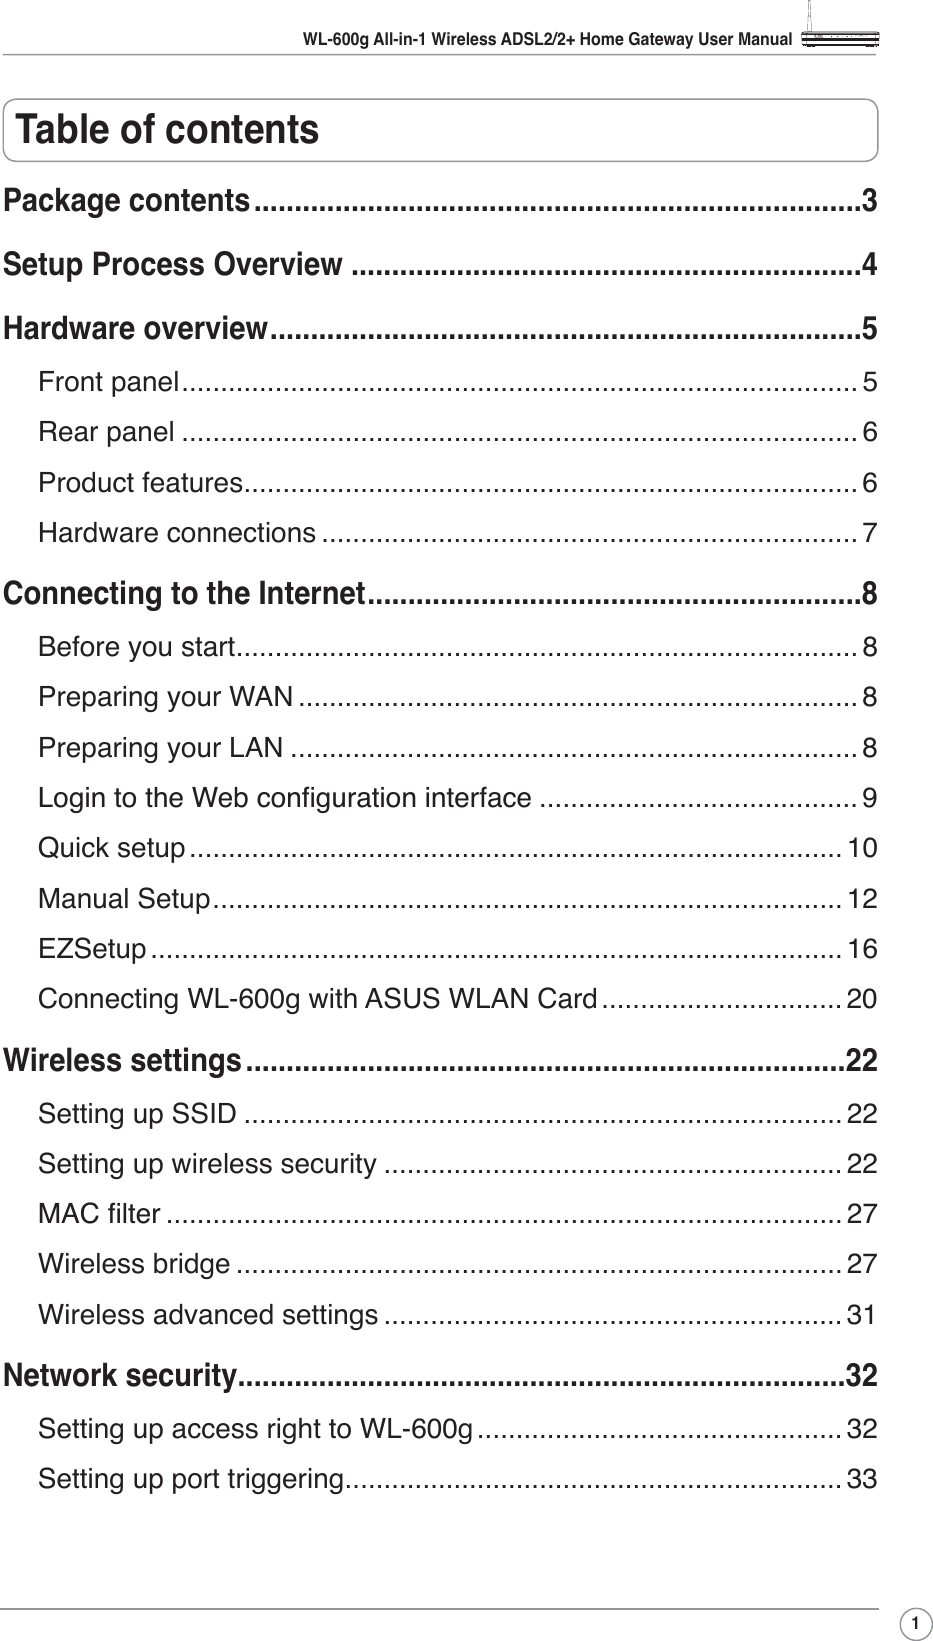 WL-600g All-in-1 Wireless ADSL2/2+ Home Gateway User Manual1Table of contentsPackage contents...........................................................................3Setup Process Overview ...............................................................4Hardware overview.........................................................................5Front panel....................................................................................... 5Rear panel ....................................................................................... 6Product features............................................................................... 6Hardware connections ..................................................................... 7Connecting to the Internet.............................................................8Before you start................................................................................ 8Preparing your WAN ........................................................................ 8Preparing your LAN ......................................................................... 8/RJLQWRWKH:HEFRQÀJXUDWLRQLQWHUIDFH ......................................... 9Quick setup .................................................................................... 10Manual Setup................................................................................. 12EZSetup ......................................................................................... 16Connecting WL-600g with ASUS WLAN Card............................... 20Wireless settings..........................................................................22Setting up SSID ............................................................................. 22Setting up wireless security ........................................................... 220$&amp;ÀOWHU ....................................................................................... 27Wireless bridge .............................................................................. 27Wireless advanced settings ........................................................... 31Network security...........................................................................32Setting up access right to WL-600g ............................................... 32Setting up port triggering................................................................ 33